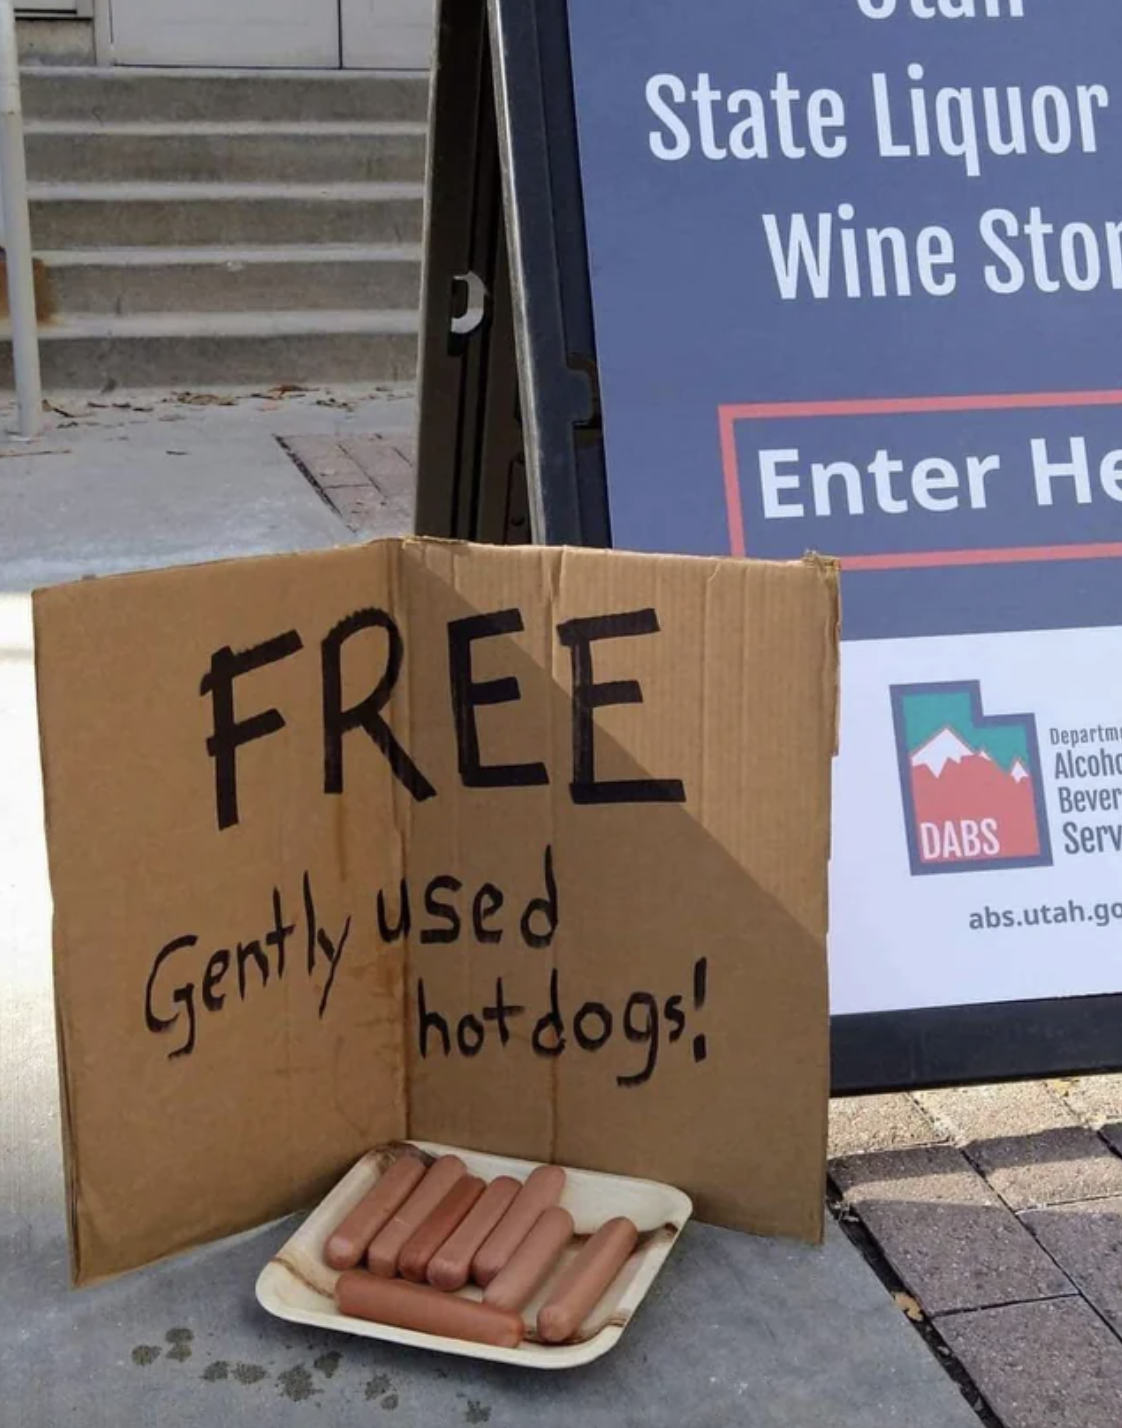 A plate full of hot dogs sits on the sidewalk, and a sign next to it advertises &quot;free gently used hot dogs&quot;